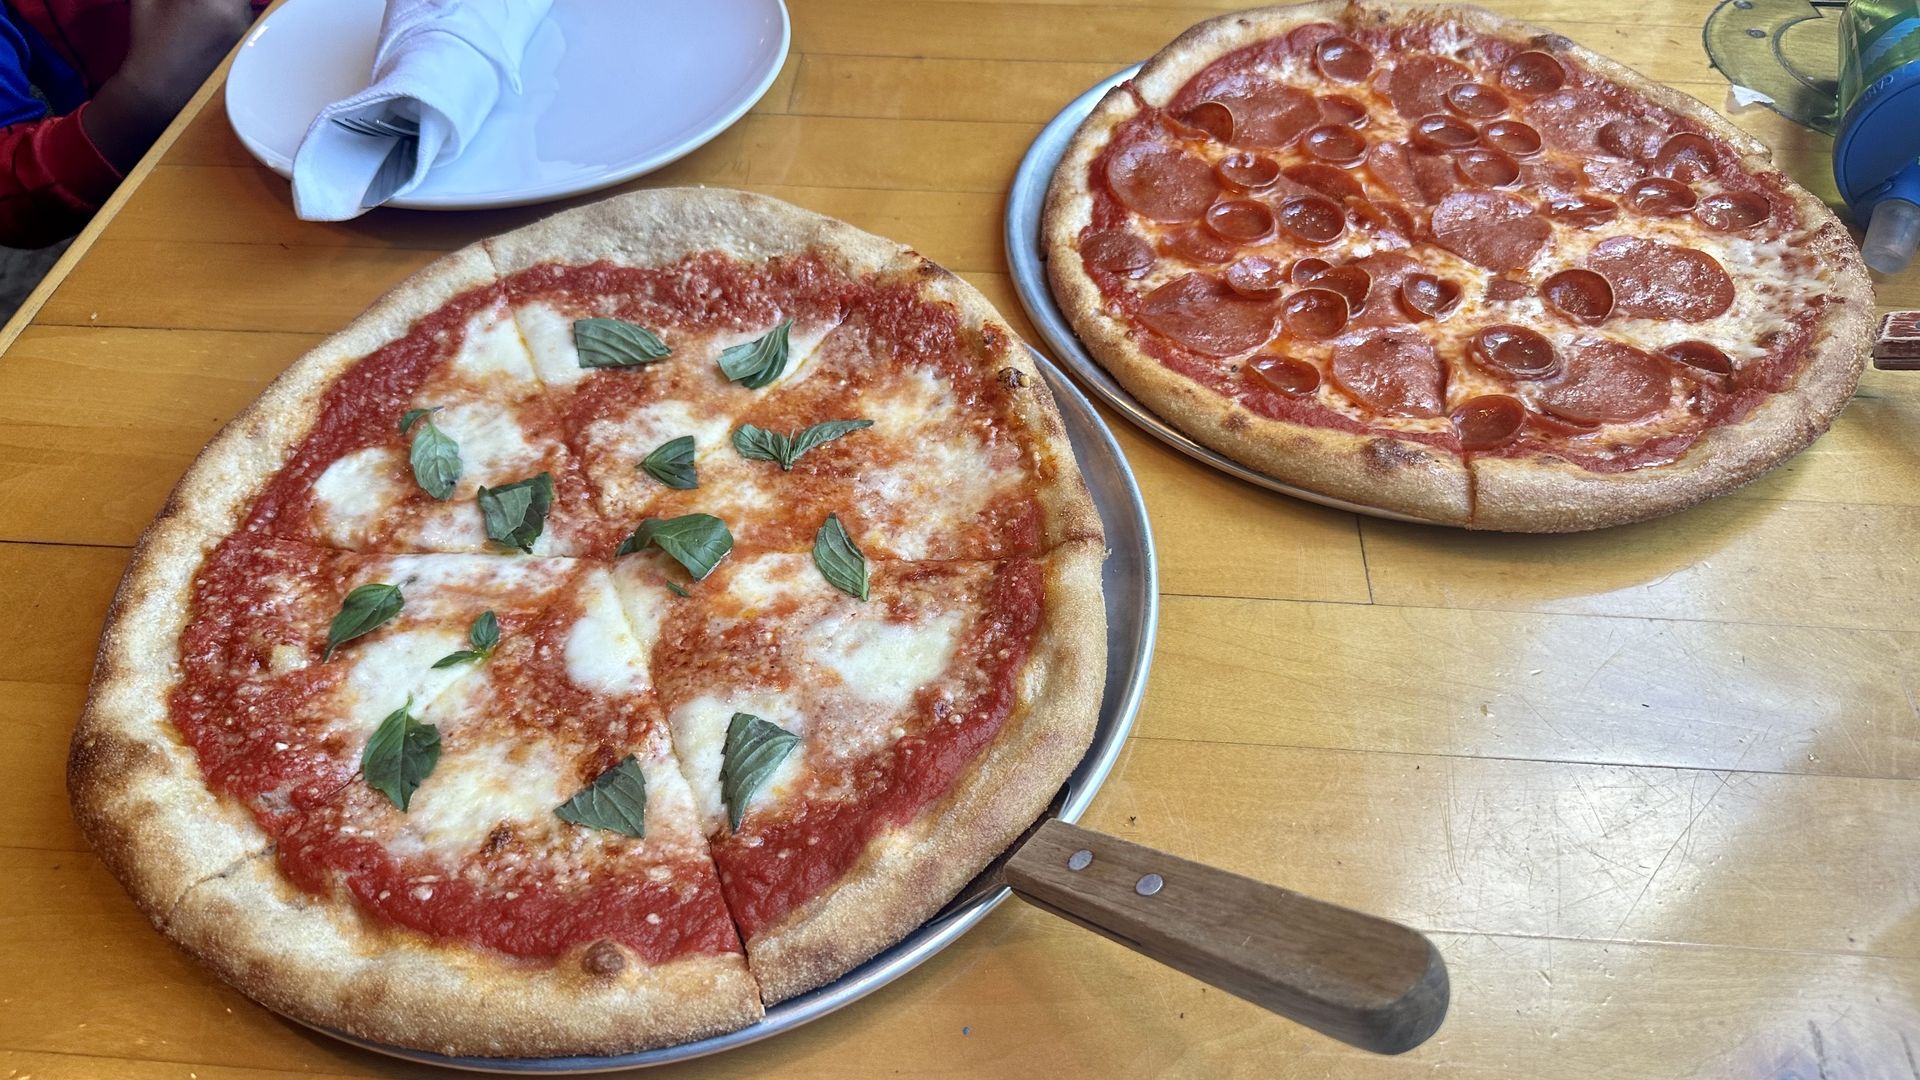 Two pizzas are shown on a table: a margherita-style cheese pizza at left foreground, and a pepperoni in right background. The cheese pizza has a pizza serving utensil underneath it.